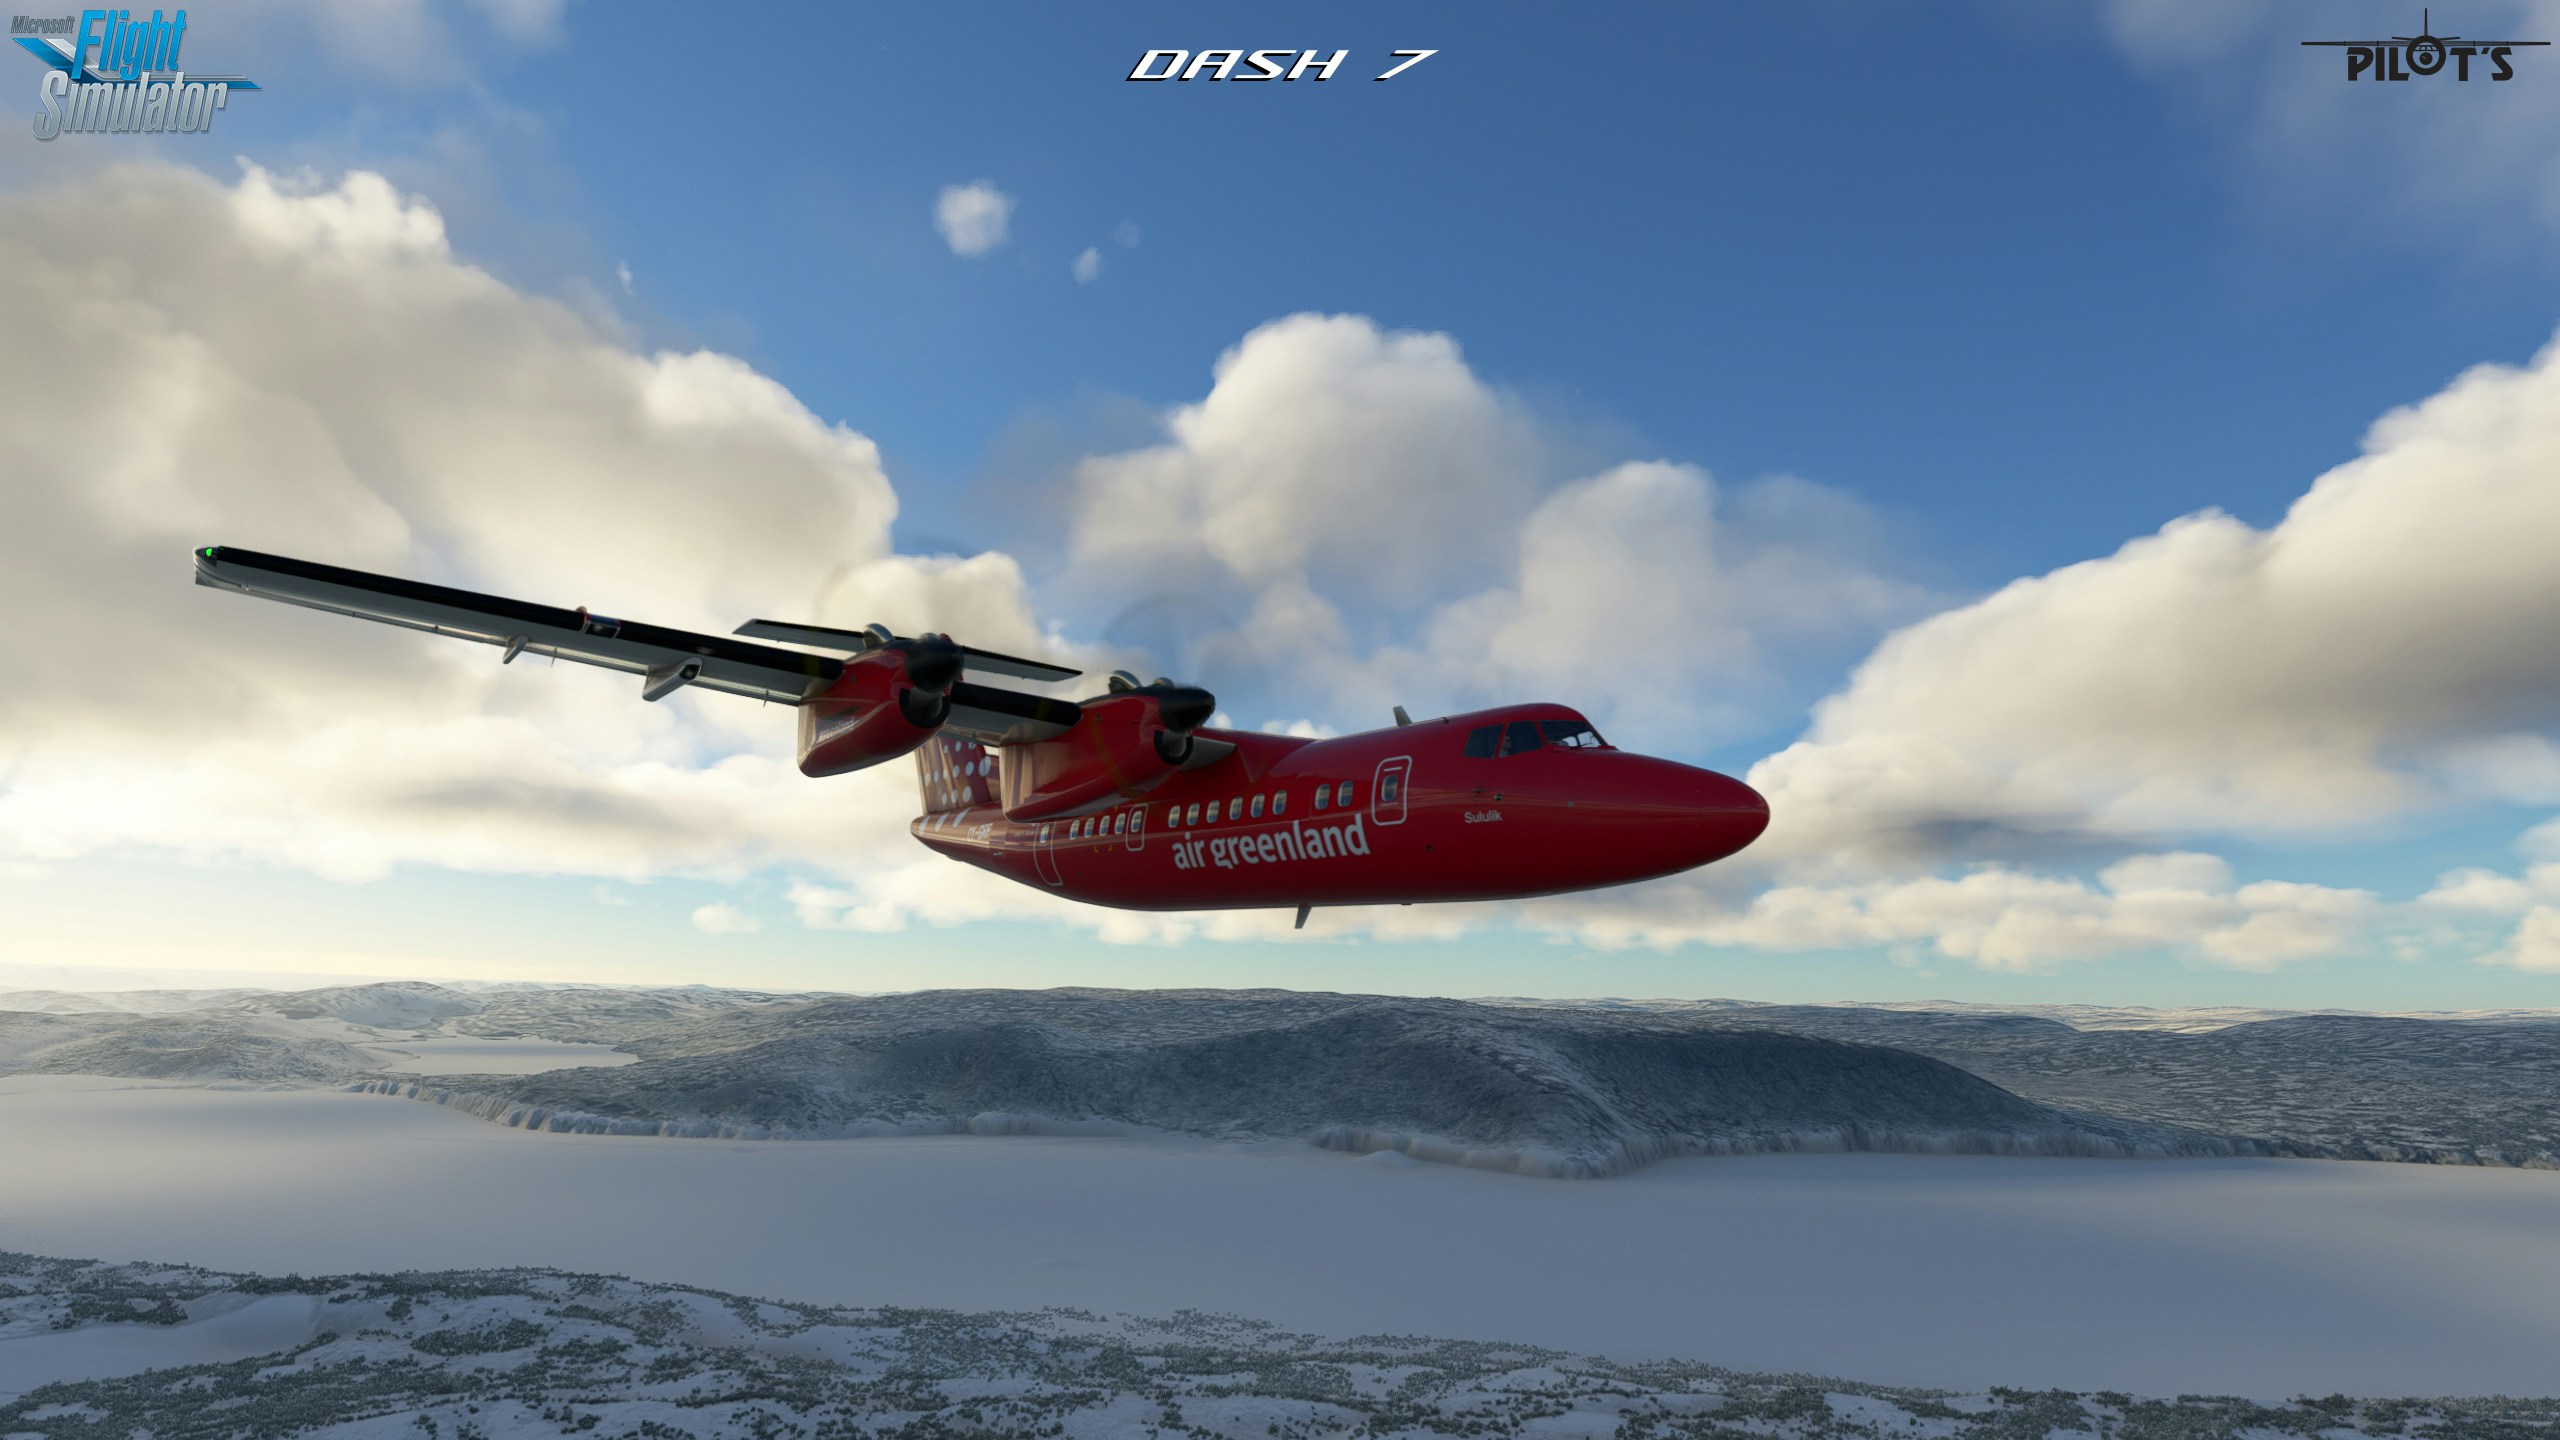 PILOT'S releases Dash 7 for MSFS